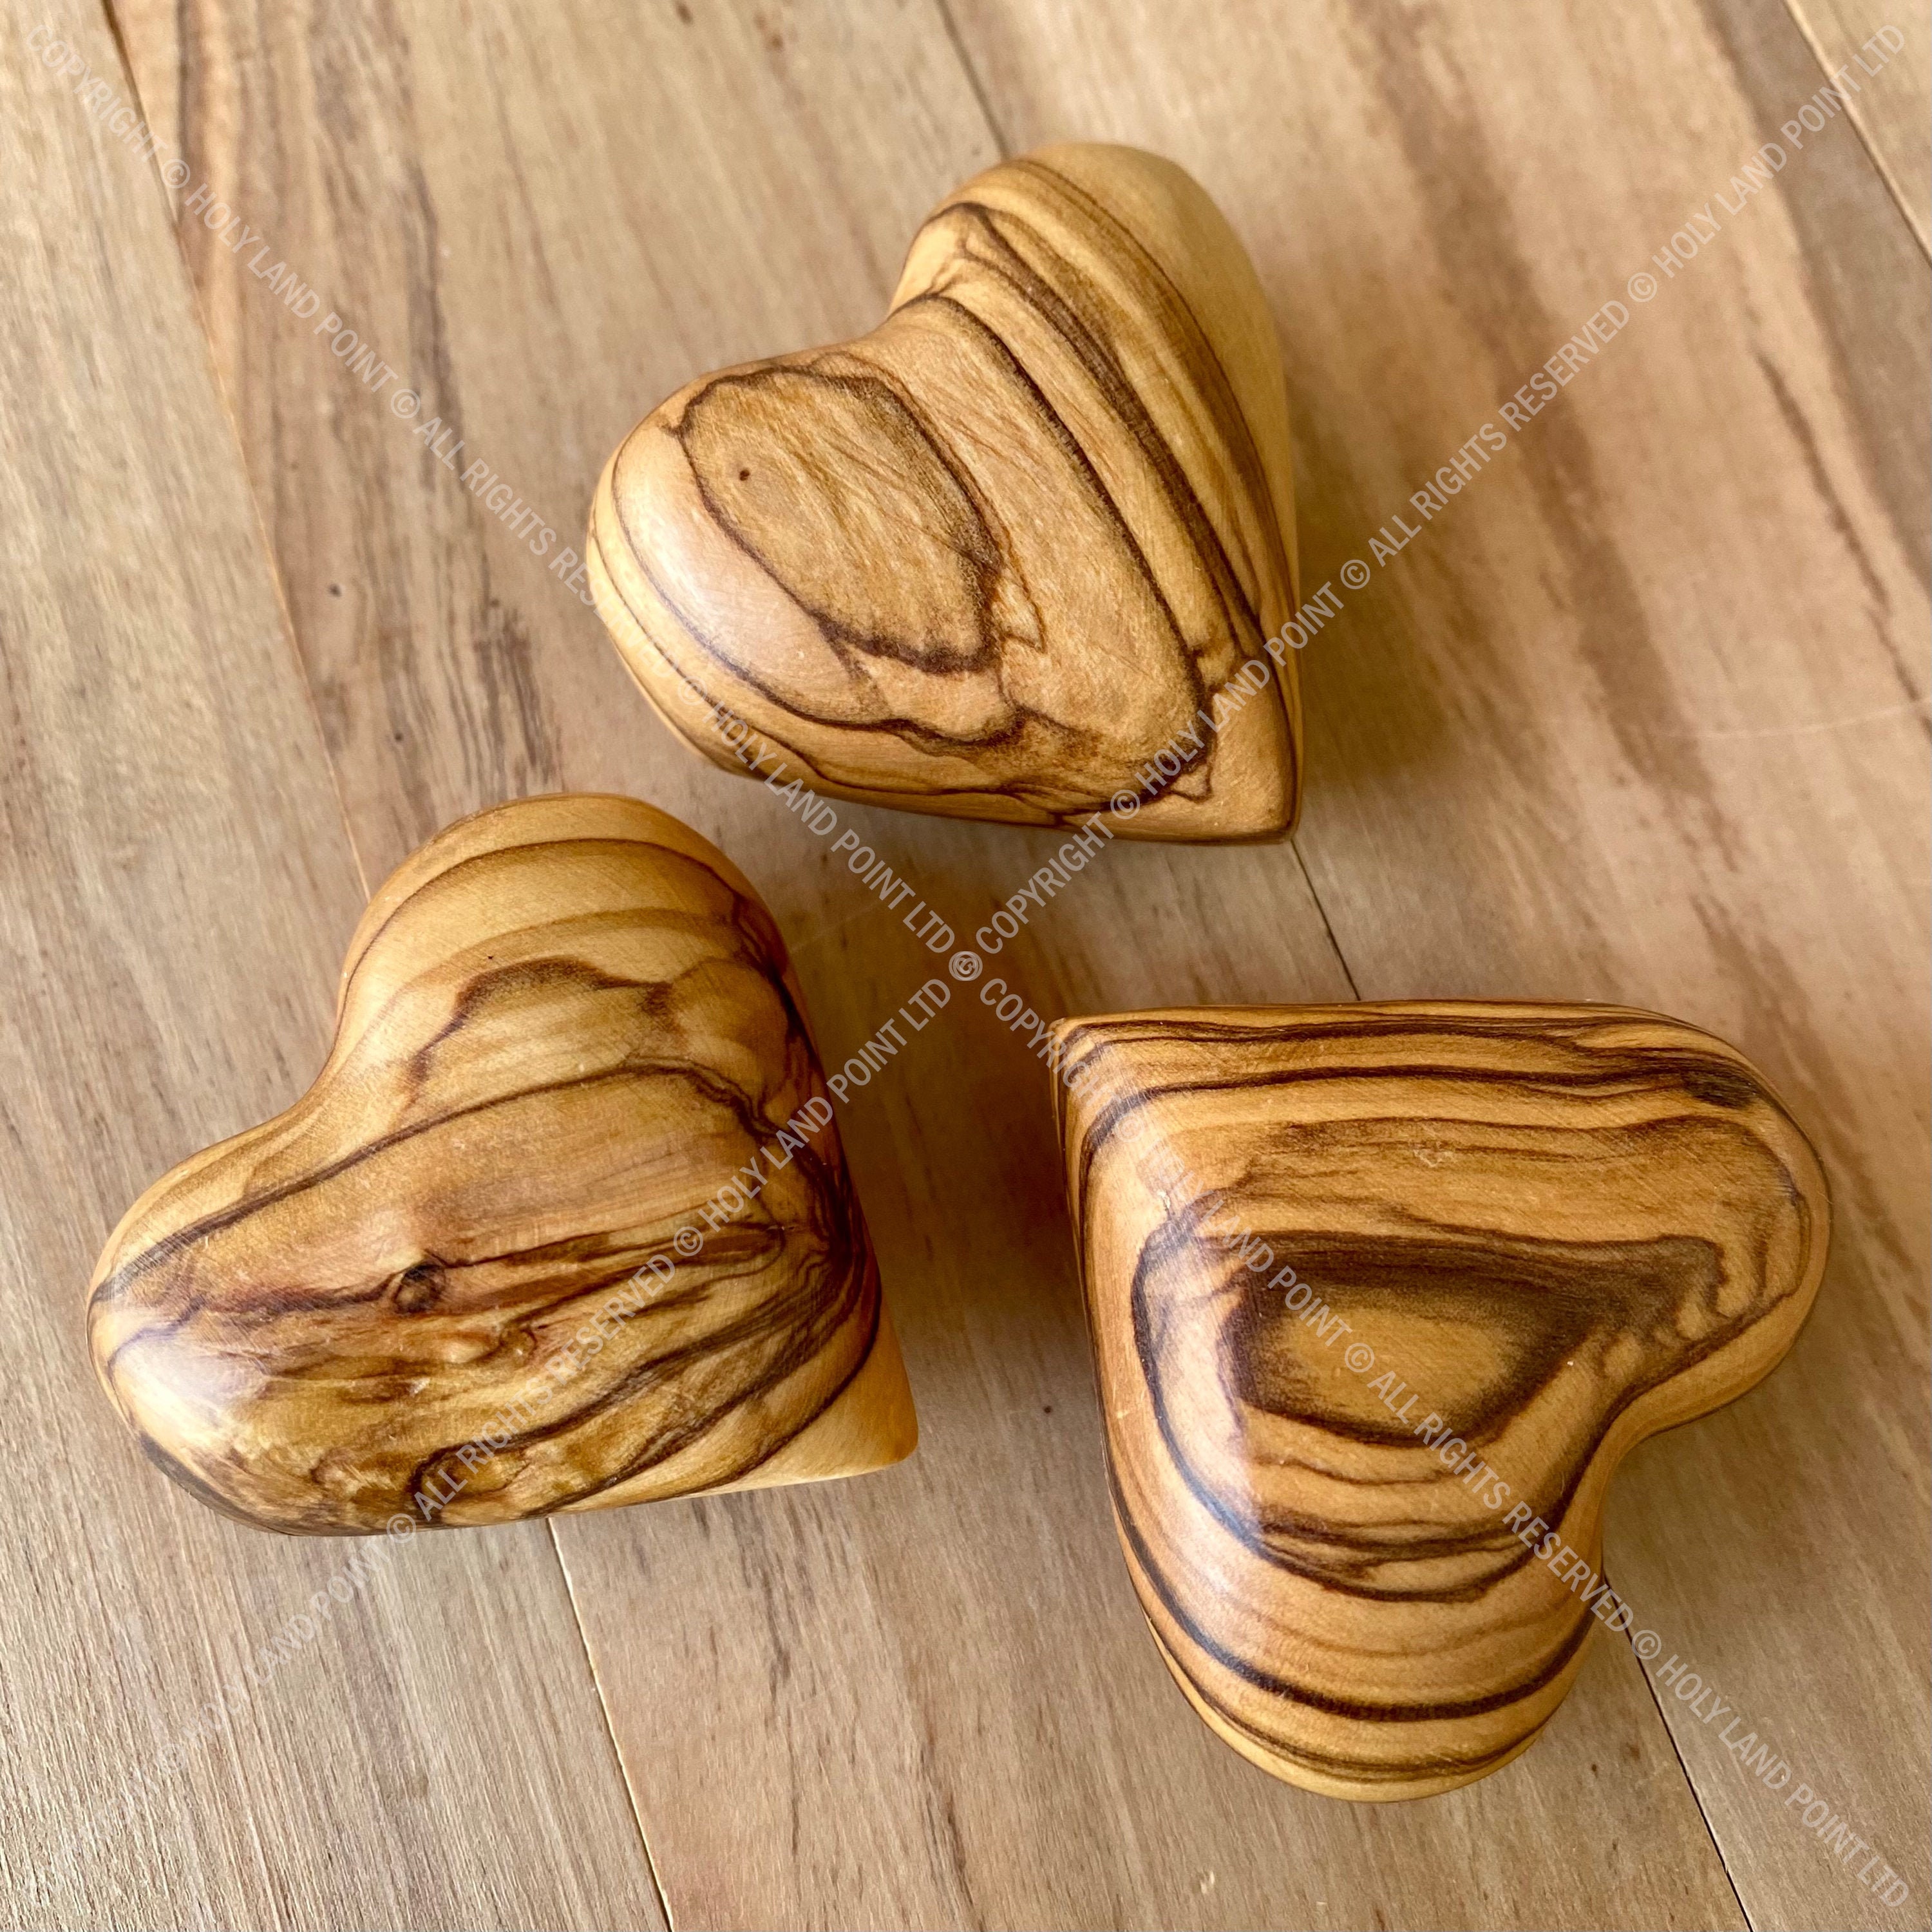 Wooden Heart, Heart Shaped Piece Of Wood 3d Rendering Stock Photo, Picture  and Royalty Free Image. Image 89905431.